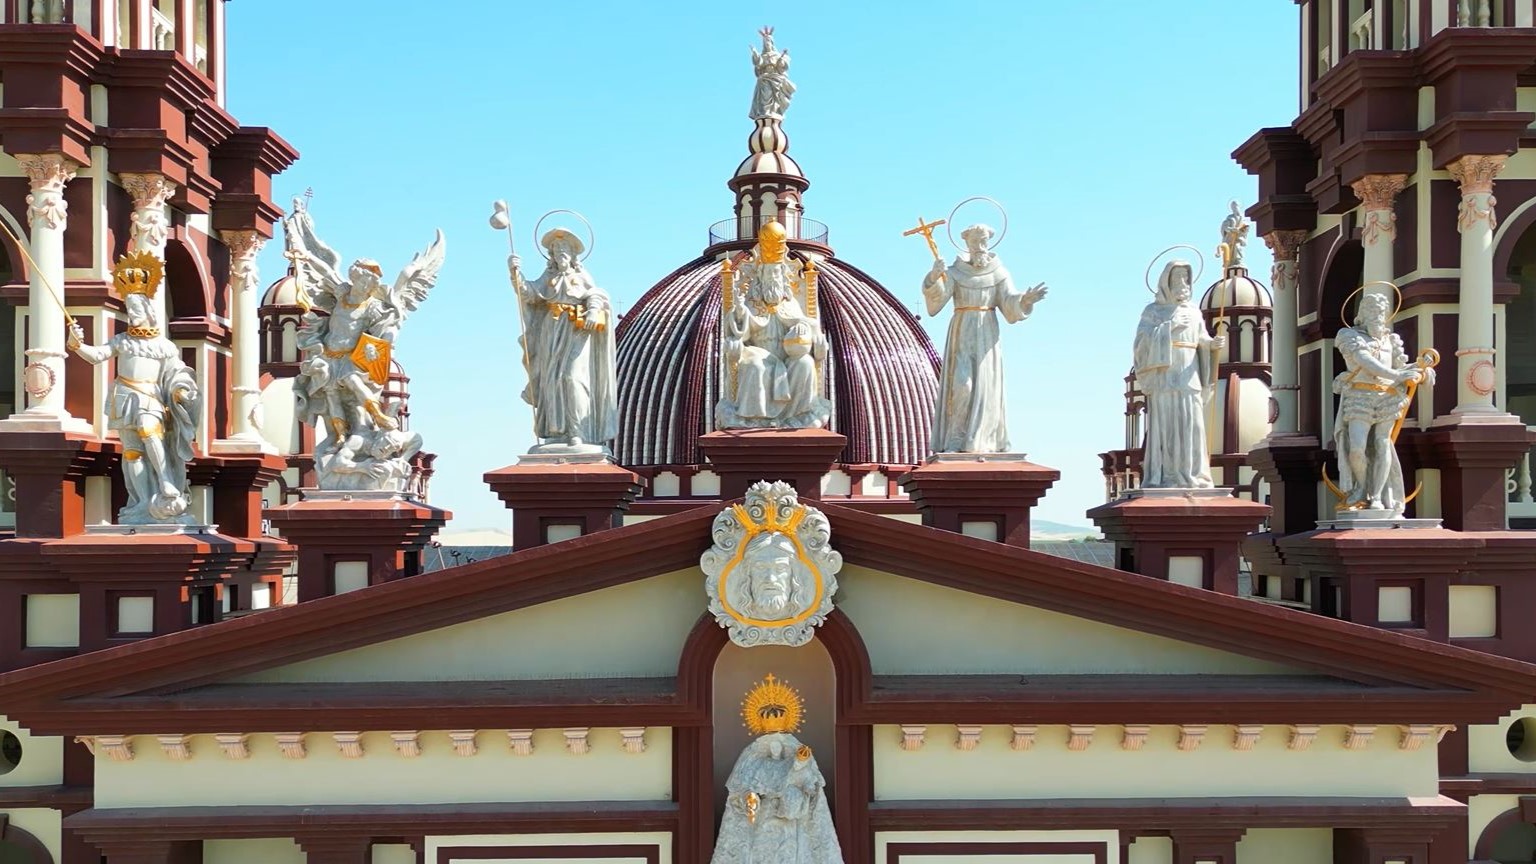 New Video! The Most Sacred Place of Apparitions of El Palmar de Troya